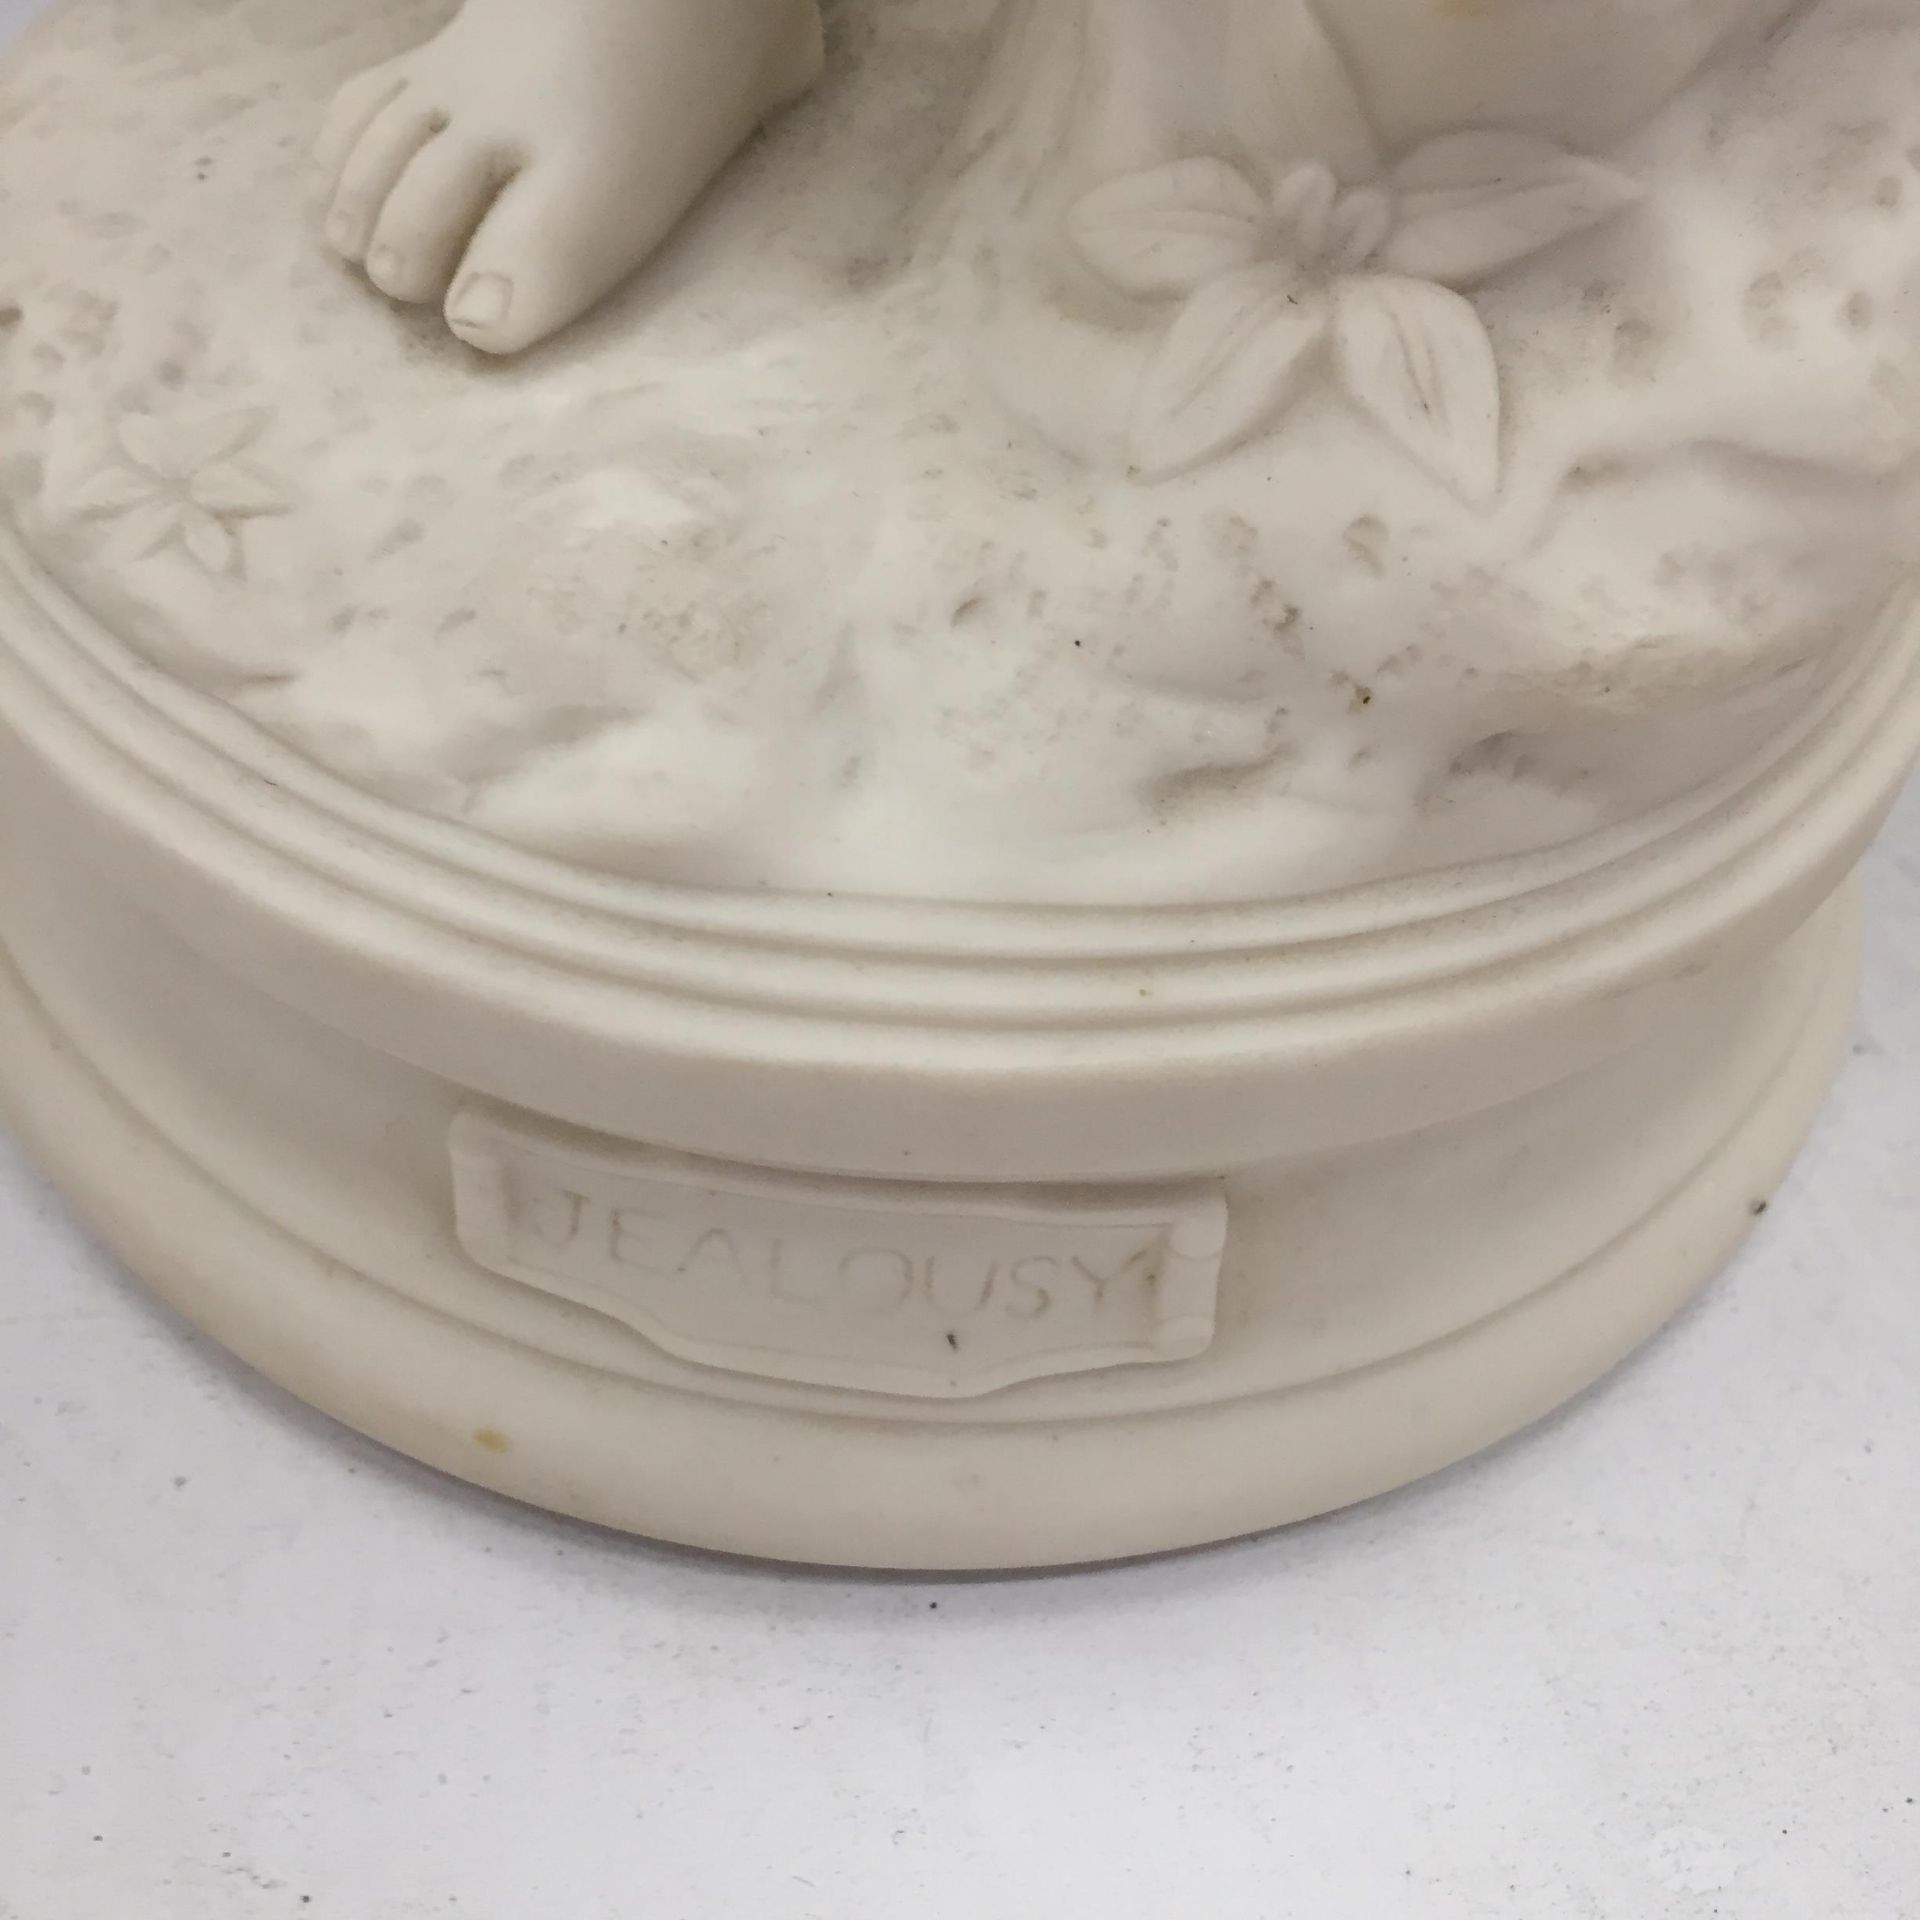 TWO PARIAN WARE FIGURES, ONE OF A MOTHER HOLDING CHILDREN AND THE OTHER TITLED 'JEALOUSY' - Image 3 of 5